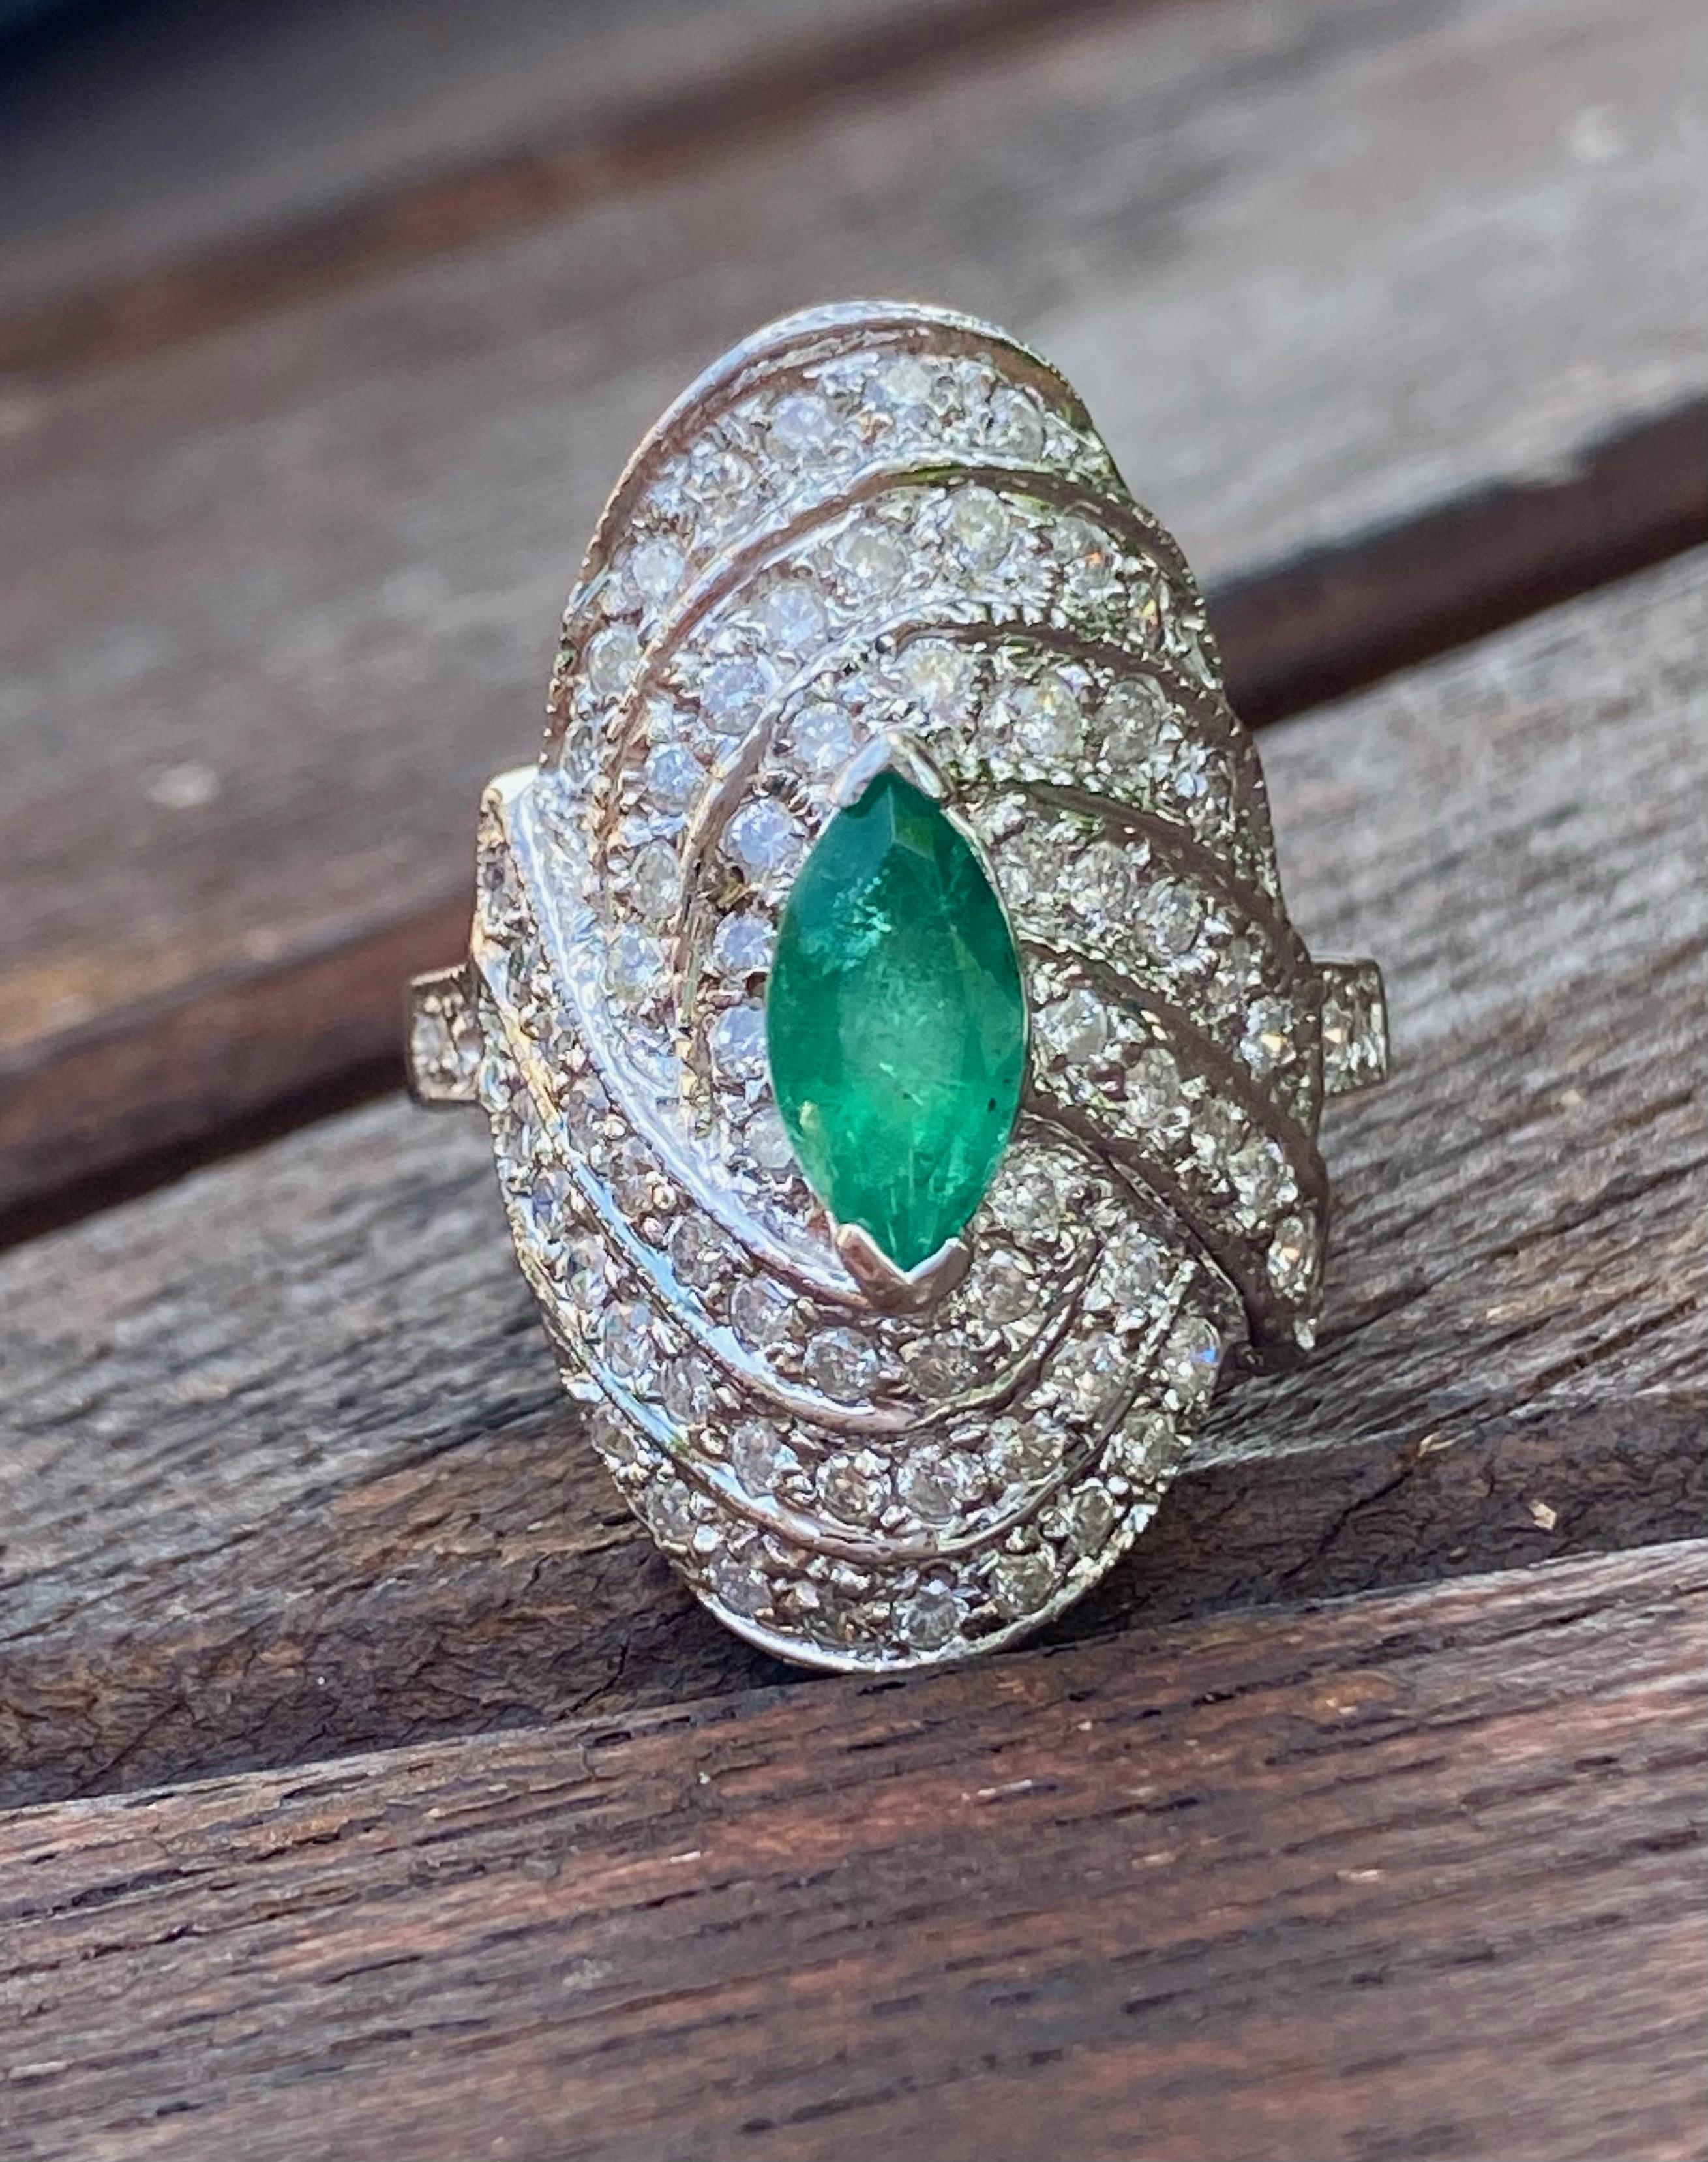 Centering a 0.75 Carat Marquis-Cut Colombian Emerald, framed by an additional 1.50 Carats of Round-Brilliant Cut Diamonds, and set in 14K White Gold, this vintage ring is a symmetrical treasure. 

Details:
✔ Stone: Emerald
✔ Center-Stone Weight: